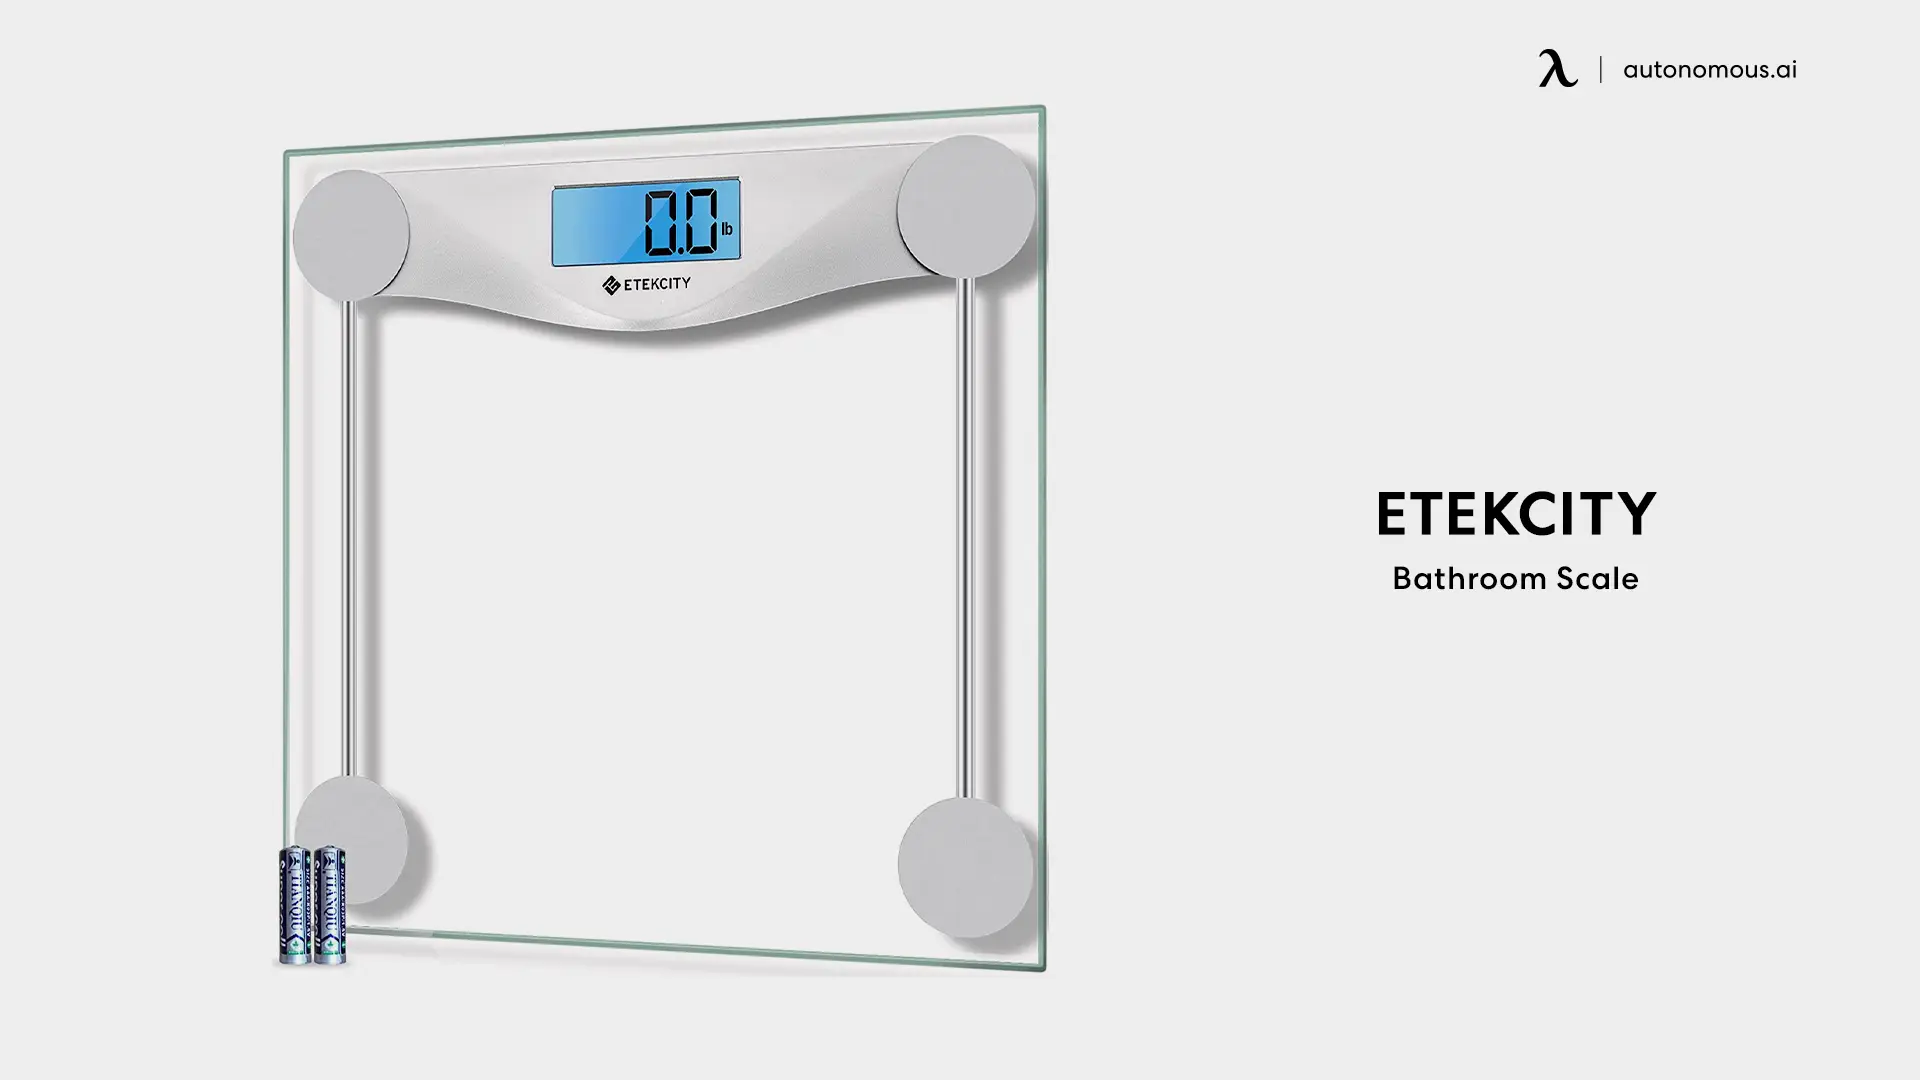 https://cdn.autonomous.ai/static/upload/images/common/upload/20221223/The-15-Best-Bathroom-Scales-to-Measure-Your-Weight6b54f3f893f.webp